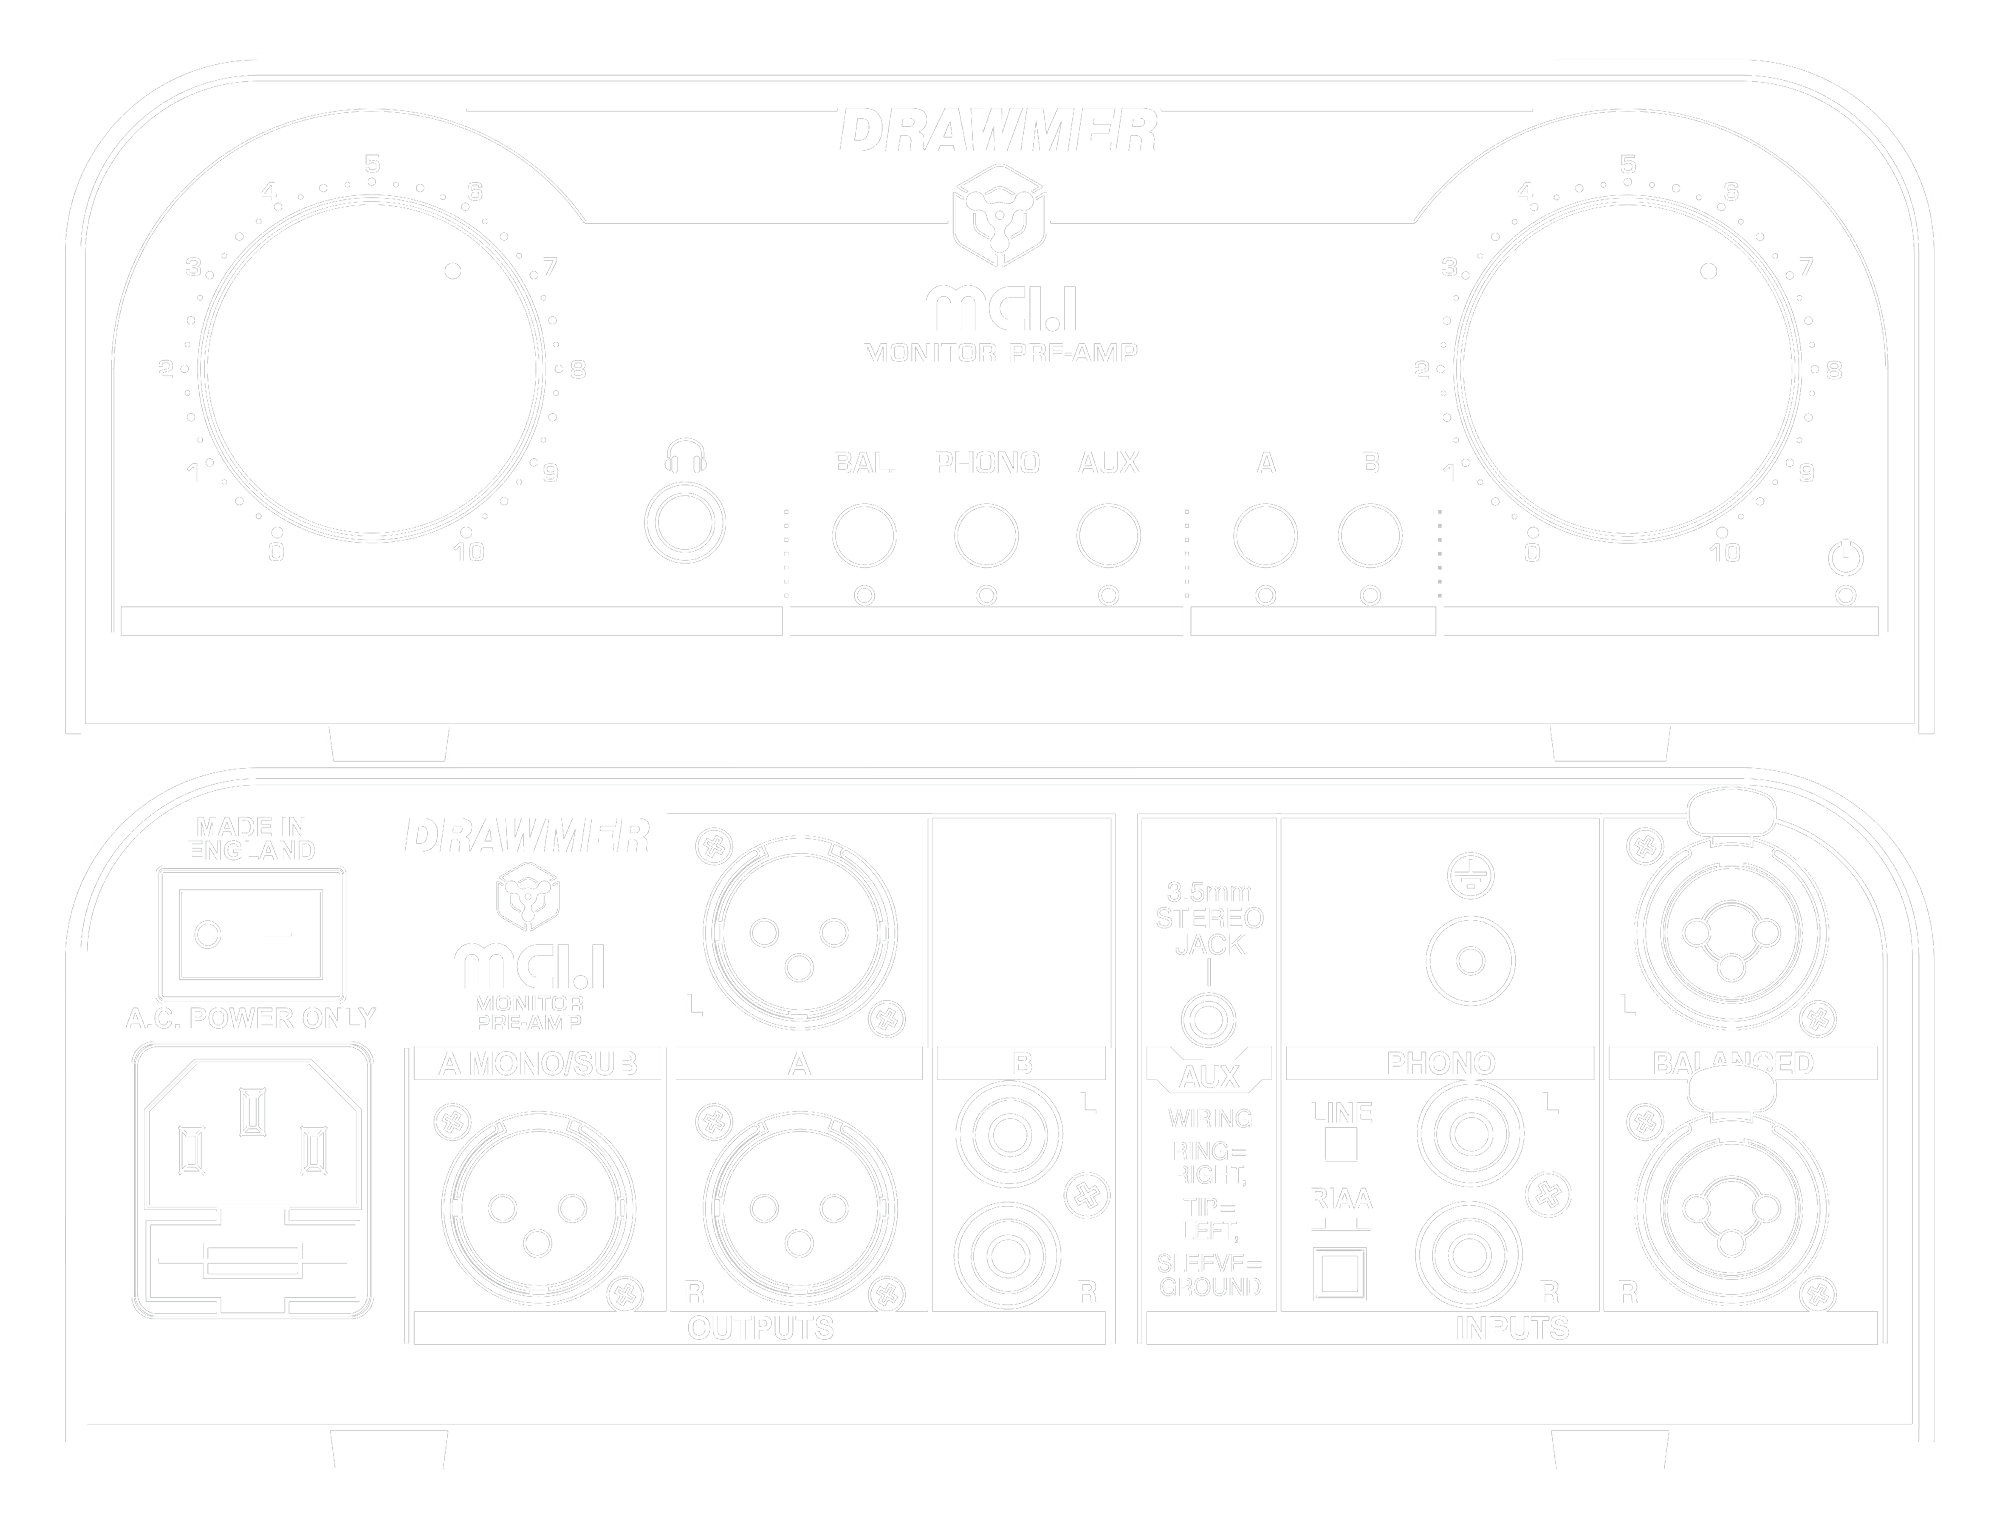 A line drawing of the front and rear panels of the MC1.1 showing controls and connectors